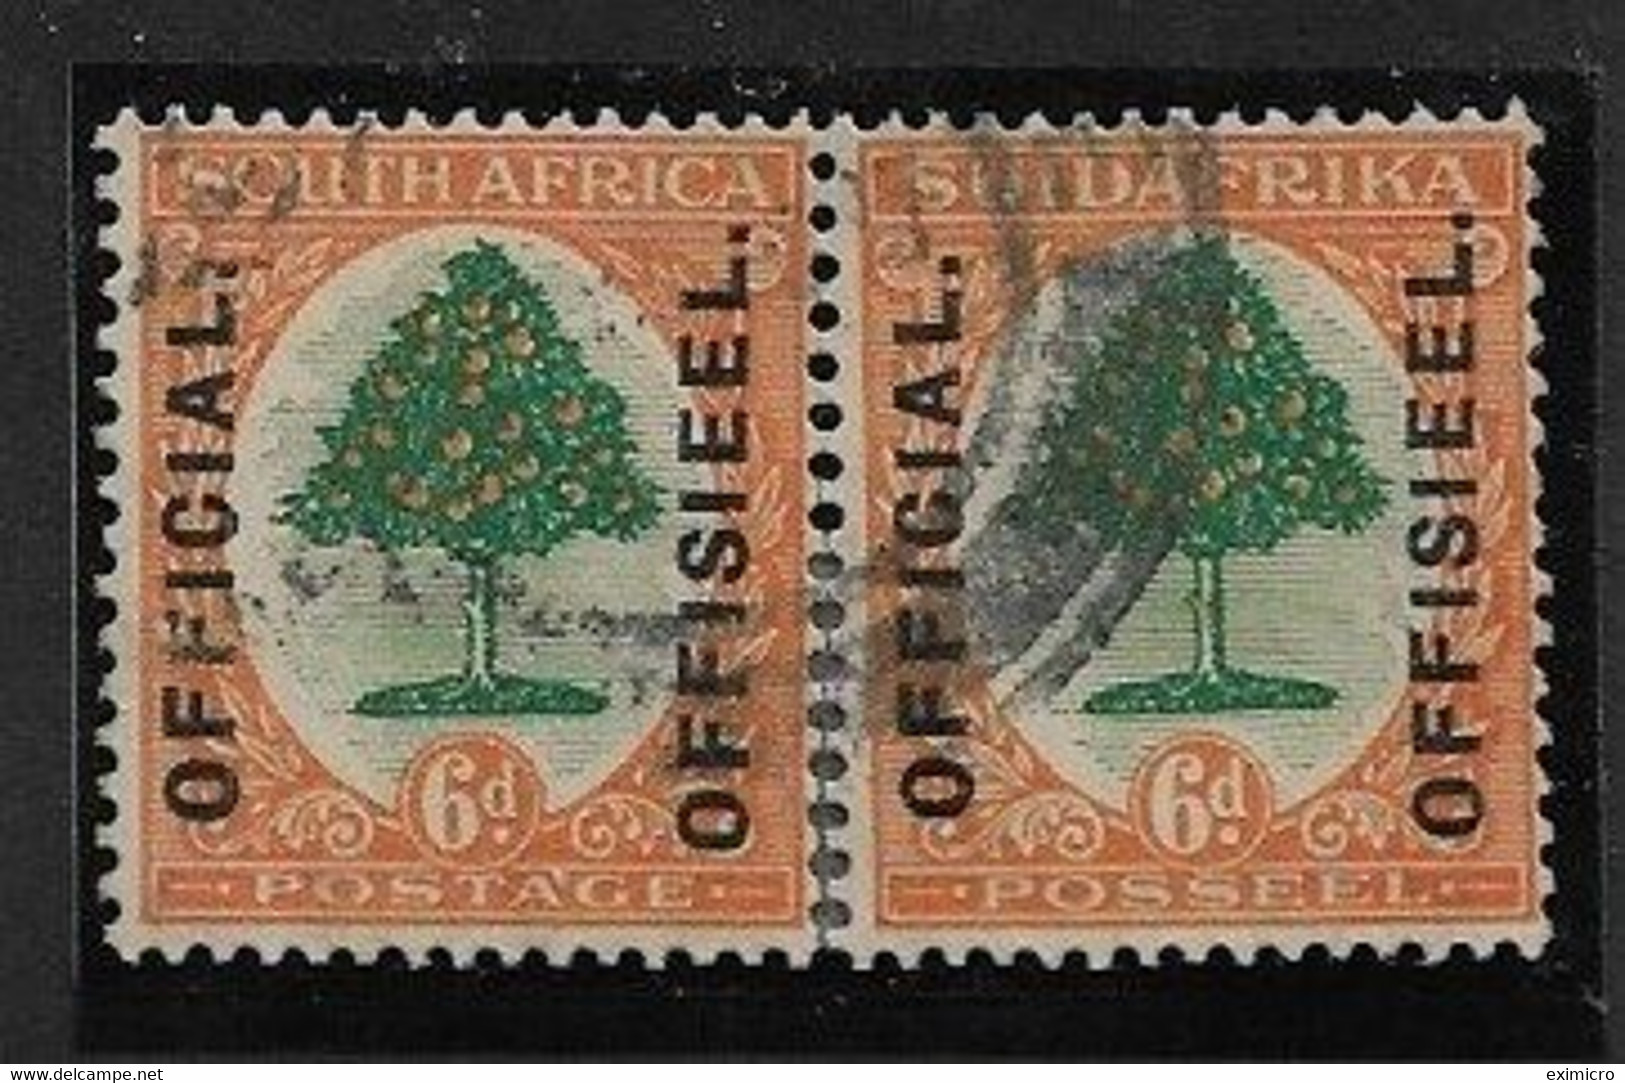 SOUTH AFRICA 1926 6d OFFICIAL BILINGUAL PAIR SG O4 FINE USED Cat £75 - Officials